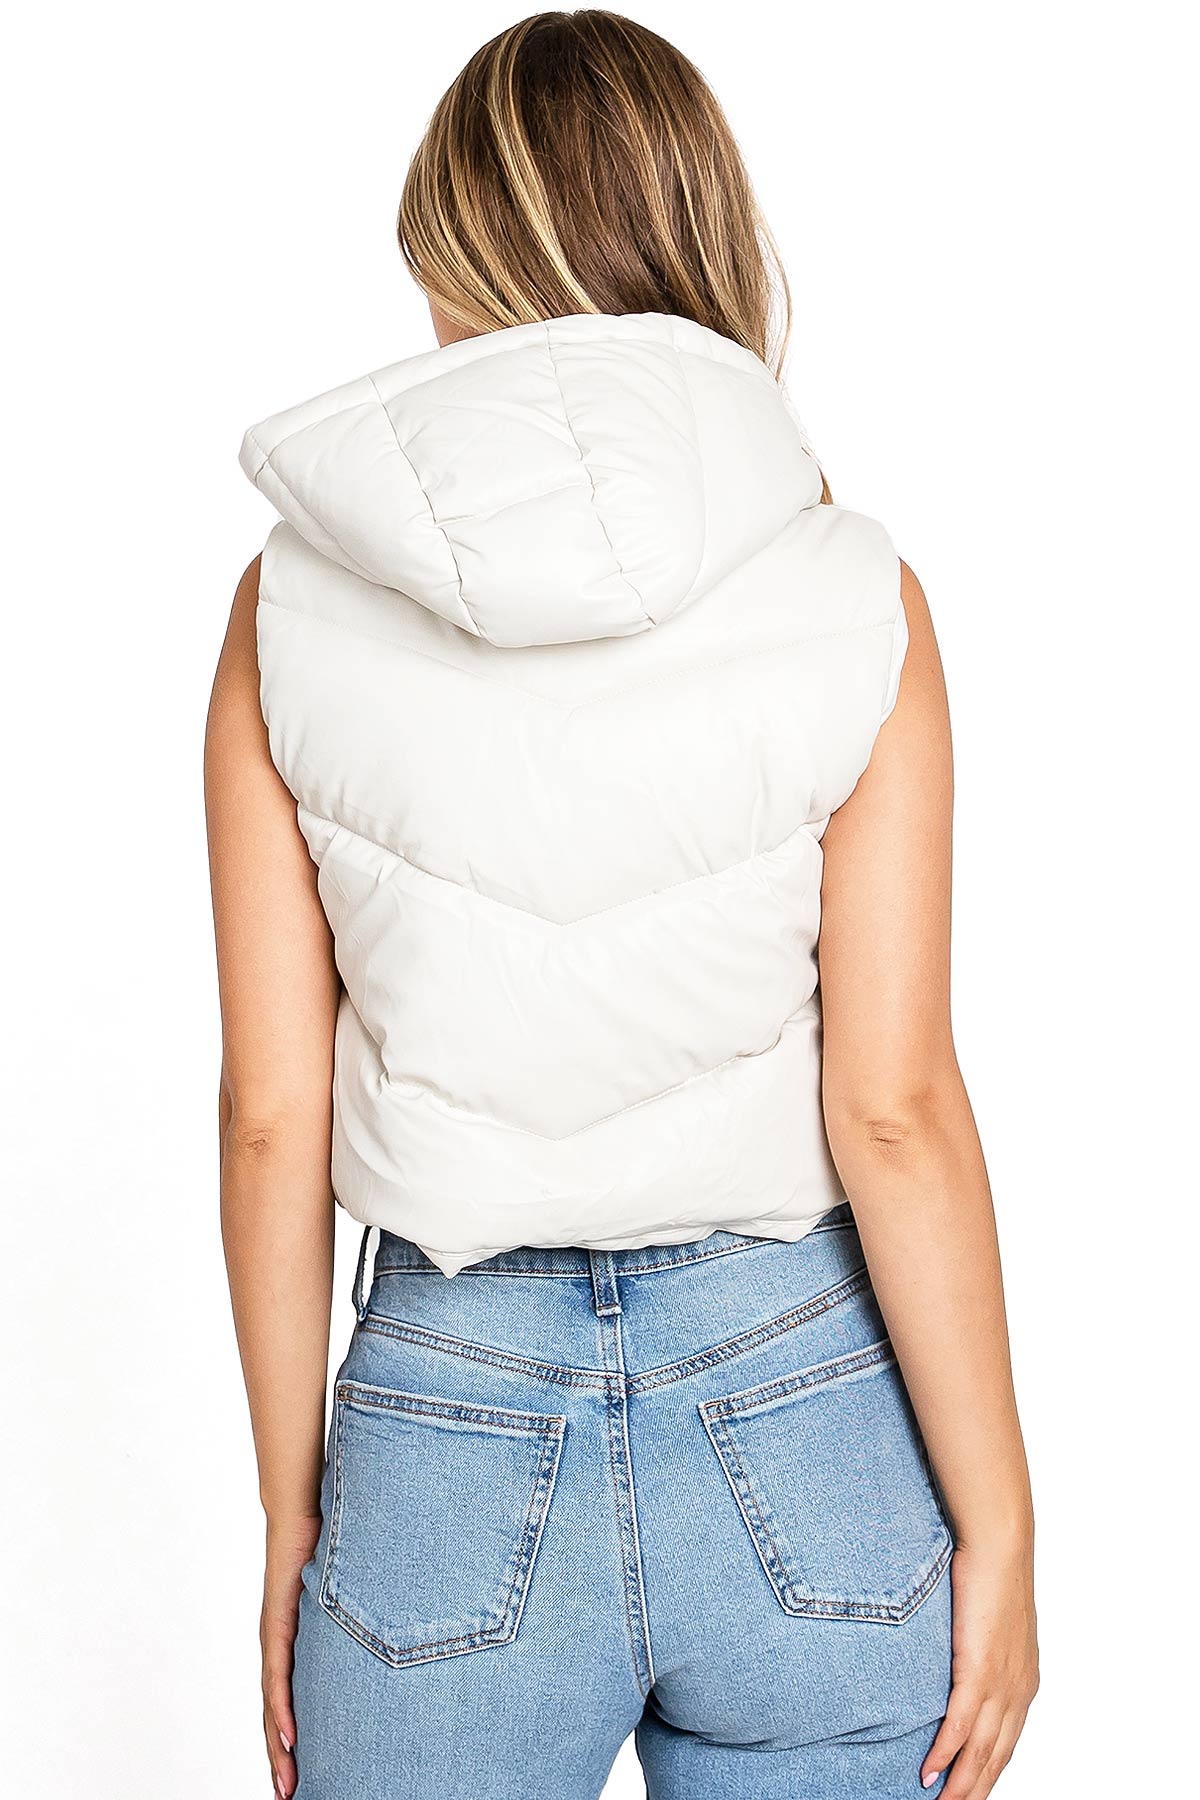 Love Tree Women's Juniors Hooded Faux Leather Puffer Vest (Large, Off White) - image 3 of 4